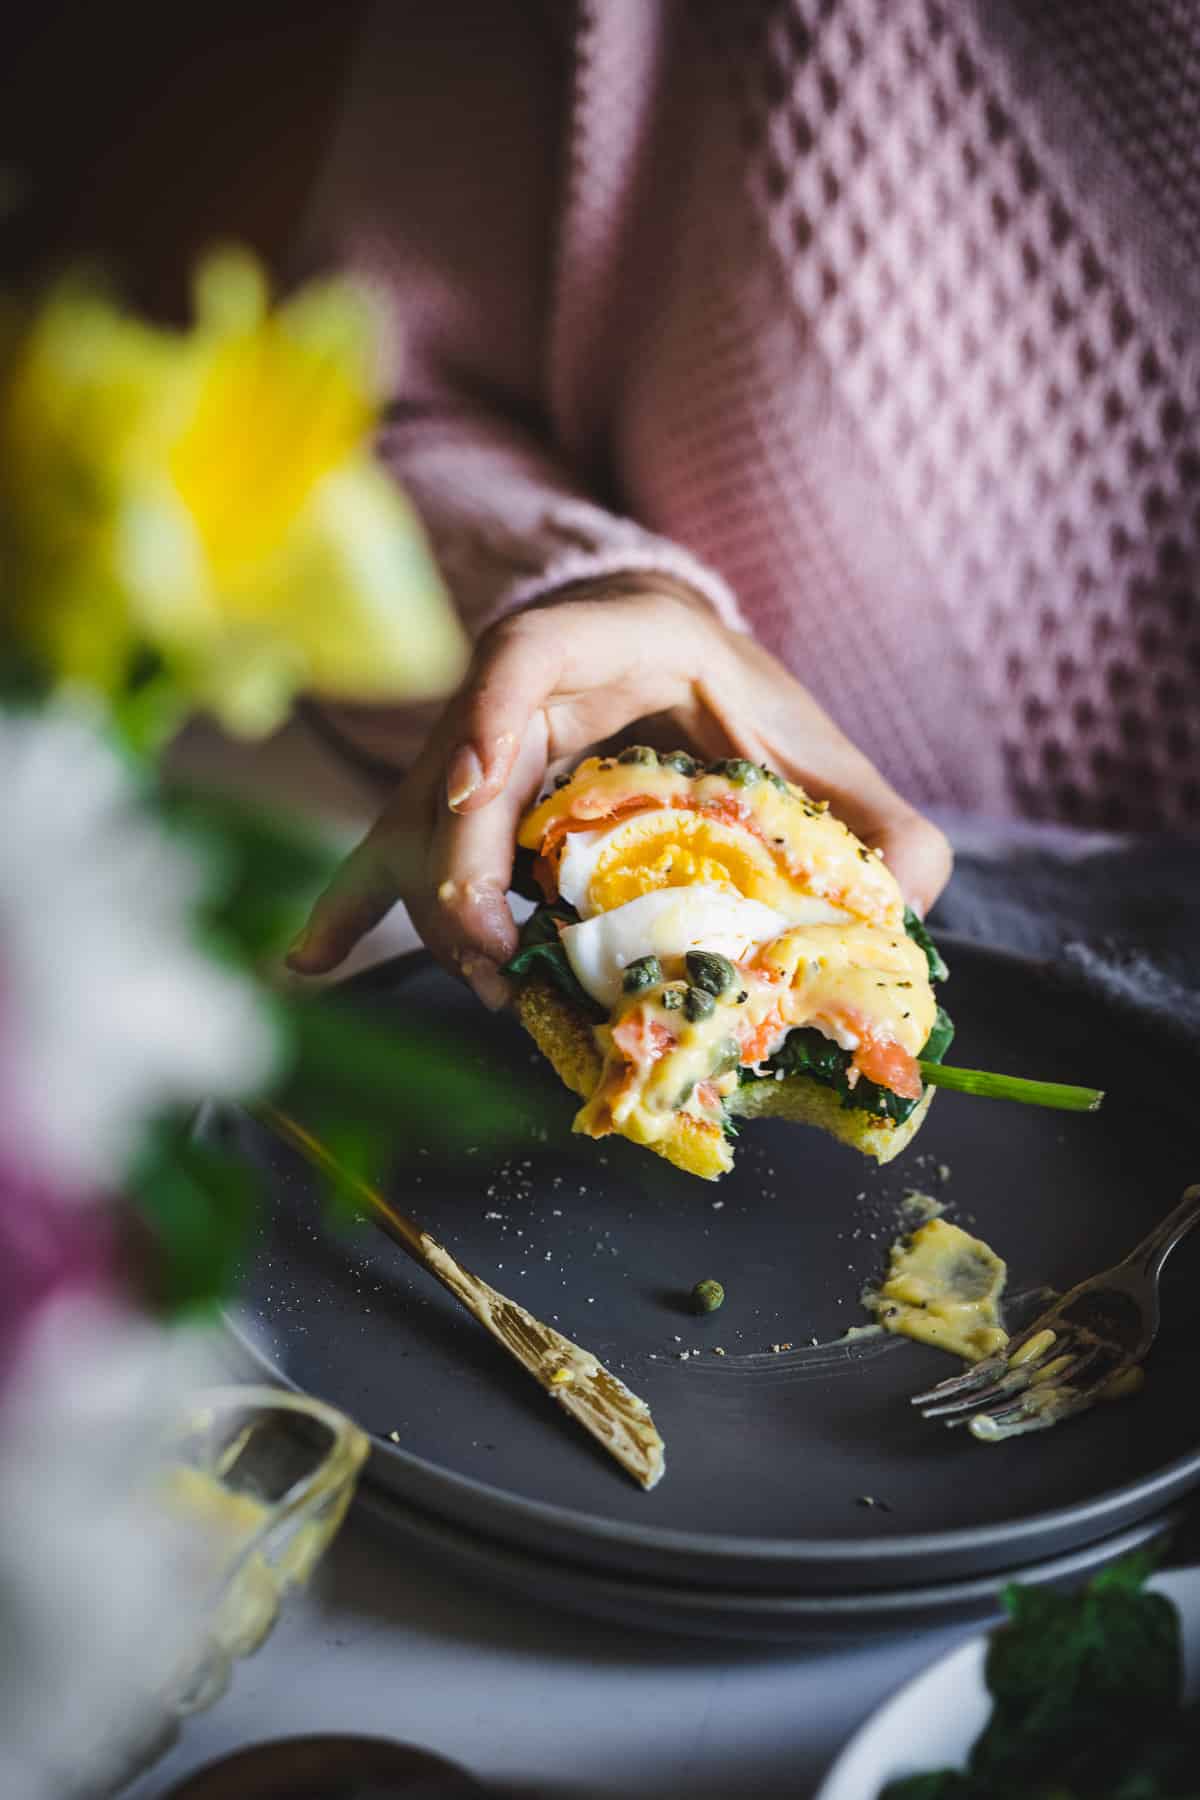 lifting cut eggs benedict portion with bite taken out